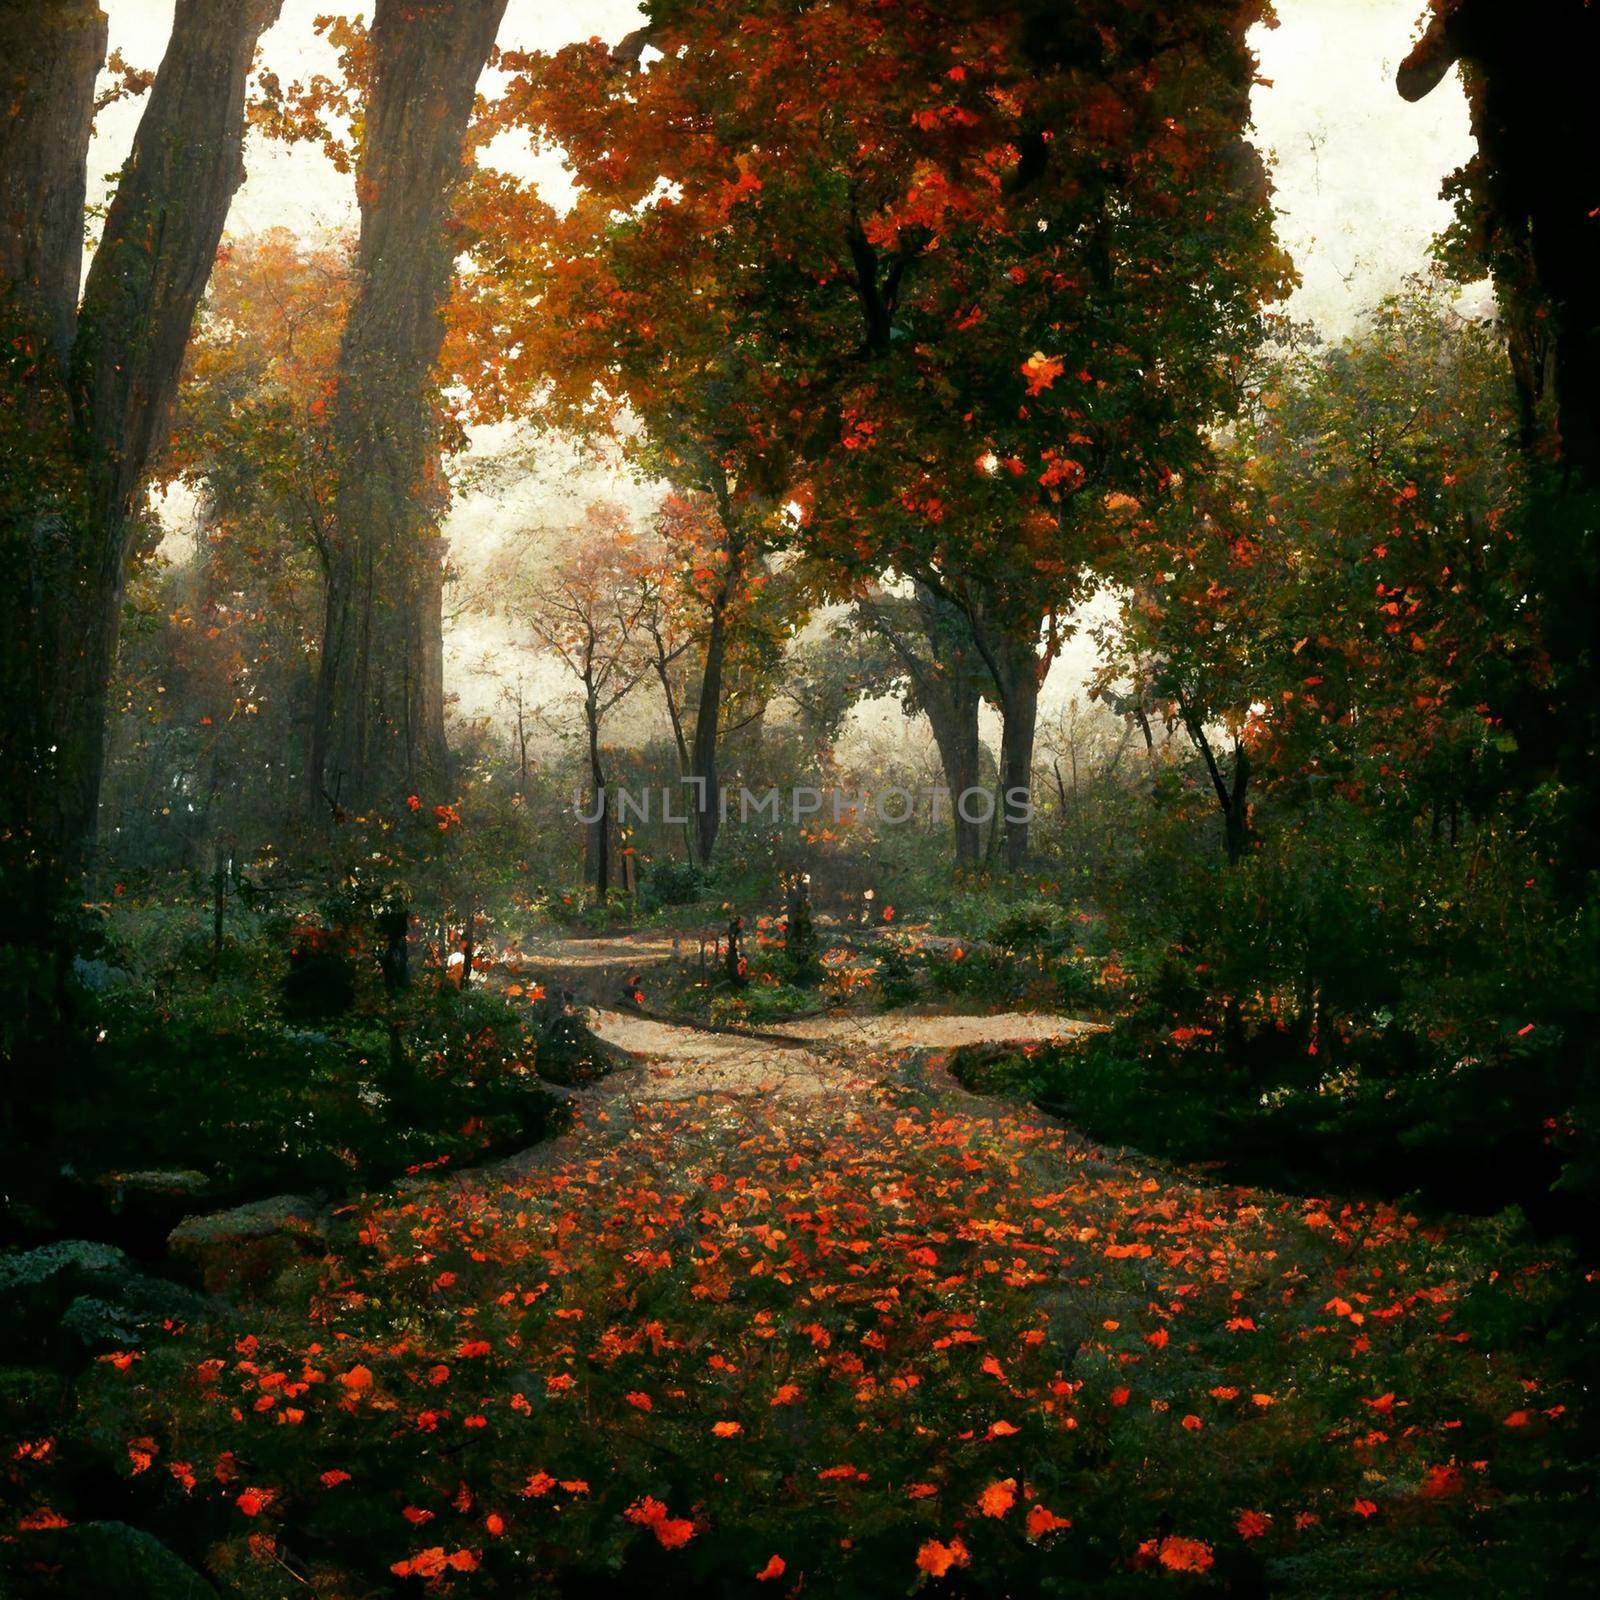 Photorealistic image of an autumn park with falling leaves by NeuroSky